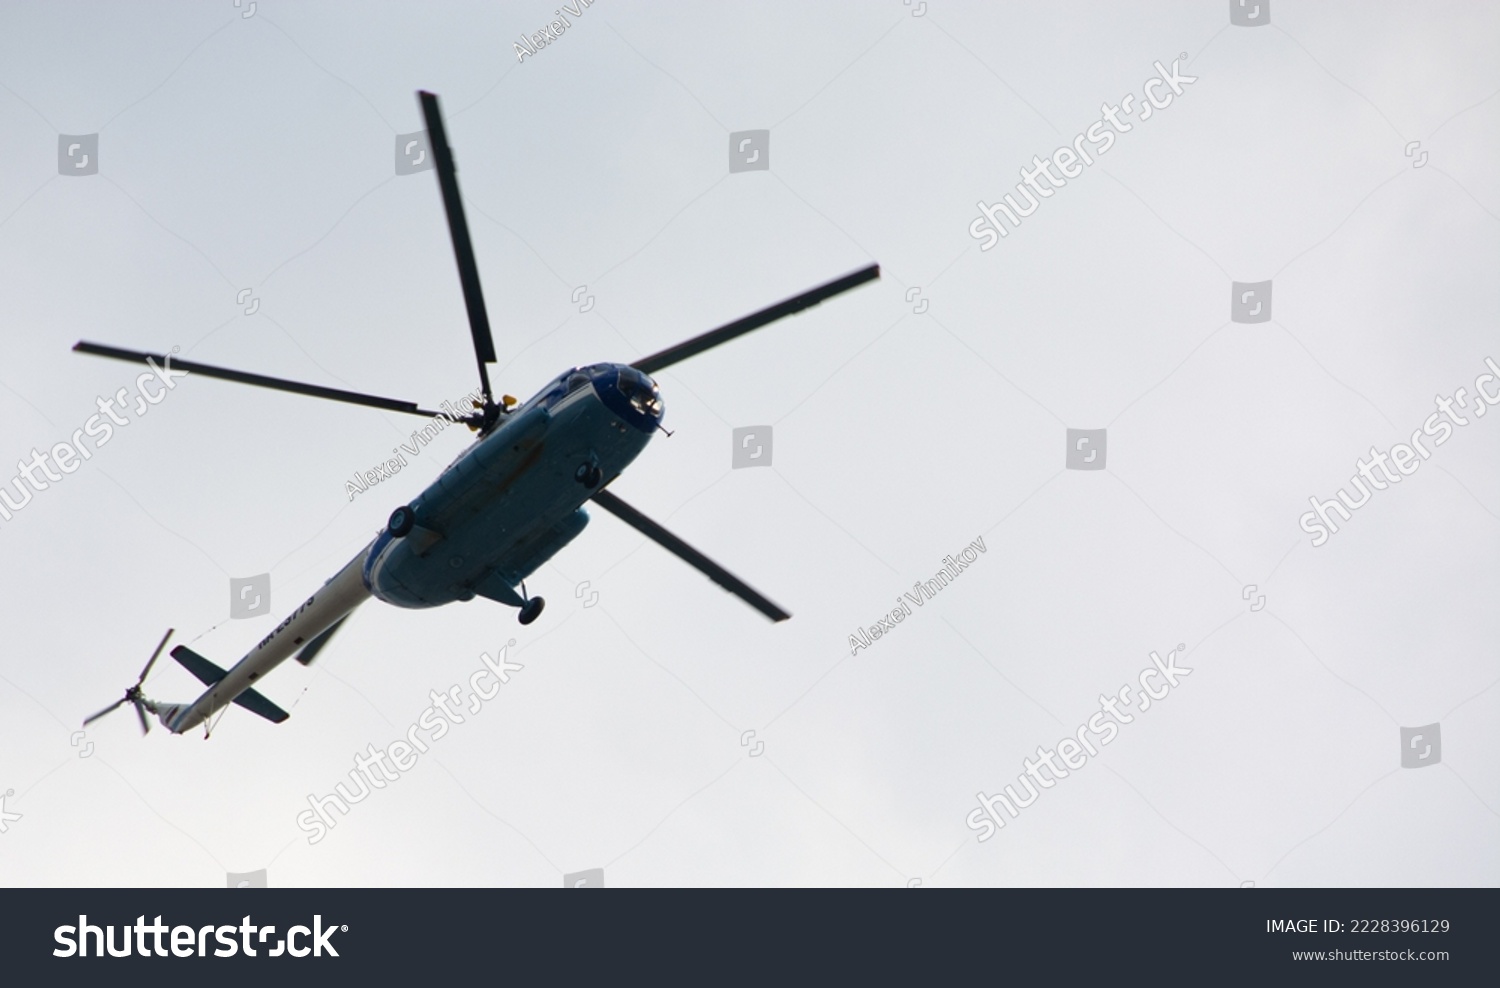 Passenger tourist helicopter Mi-8 doing sightseeing flight. Helicopter in the sky bottom view. #2228396129